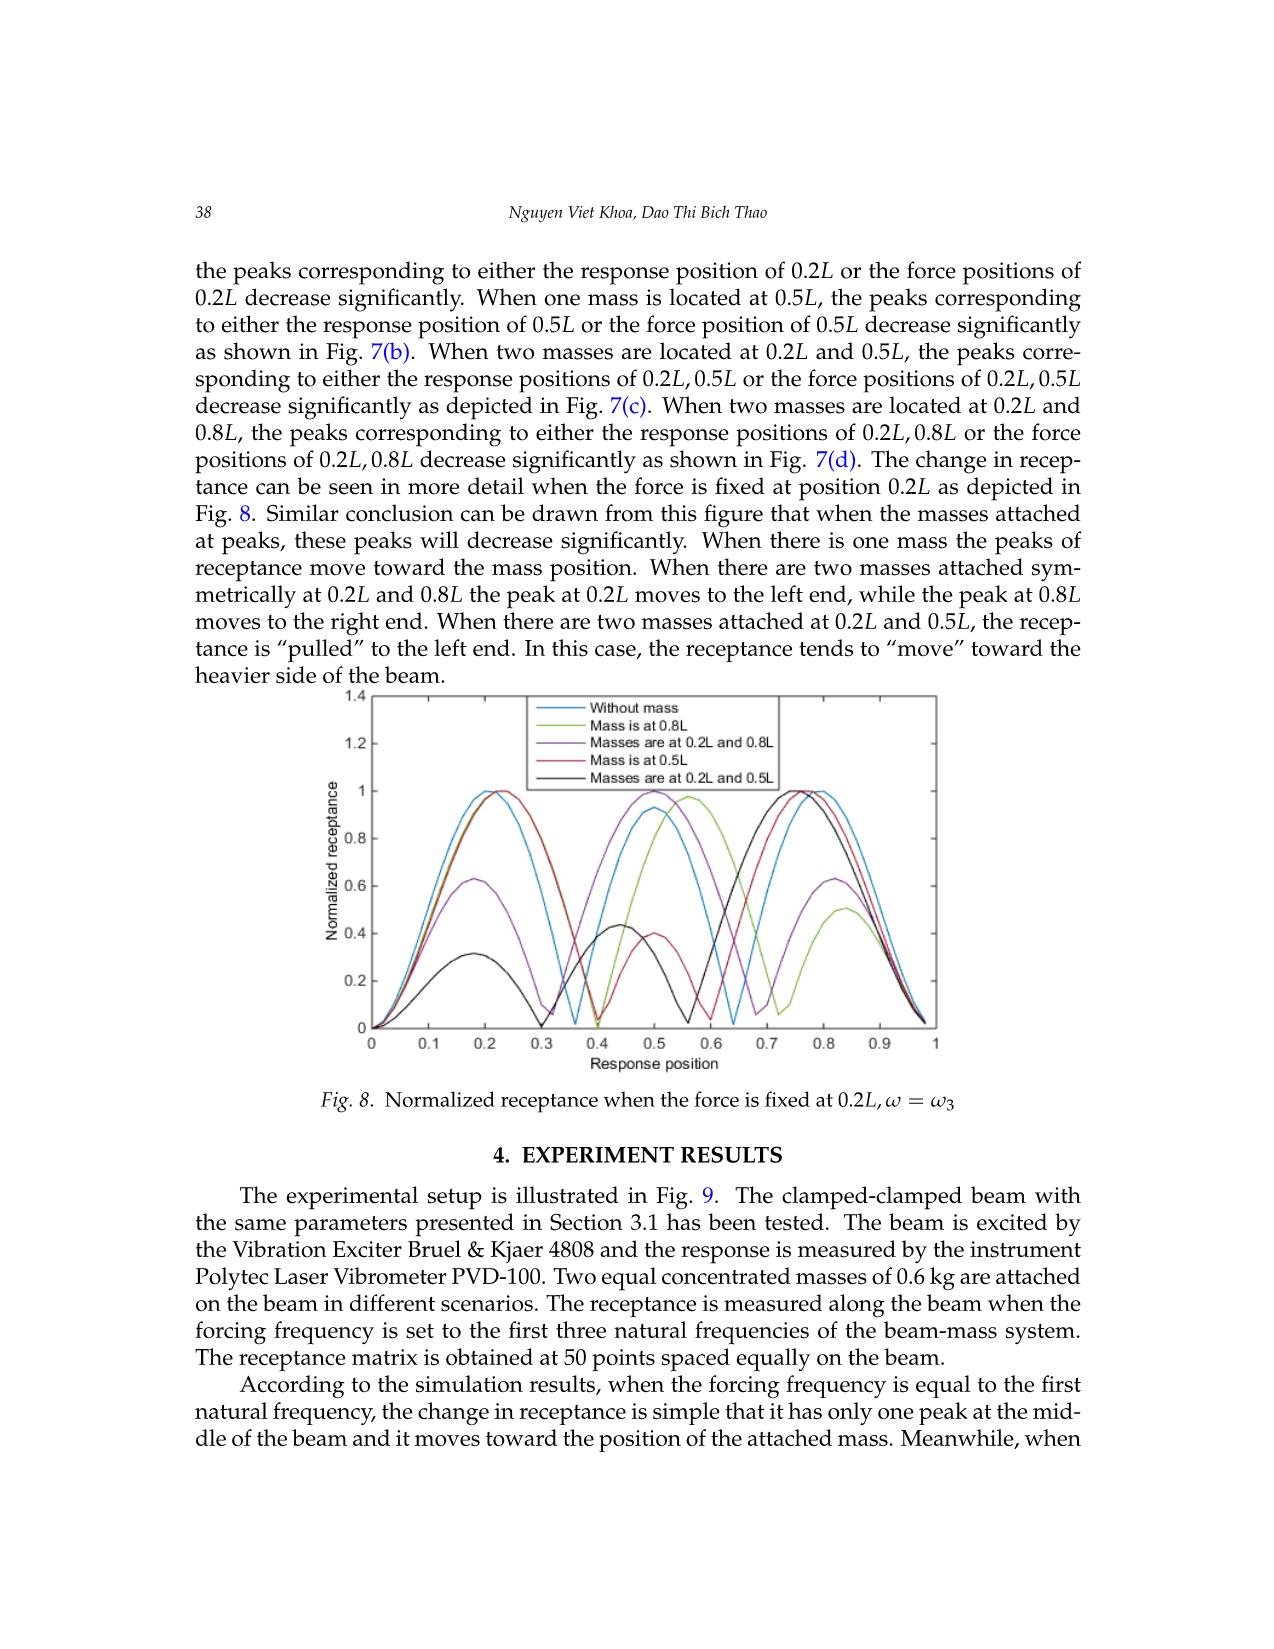 Theoretical and experimental analysis of the exact receptance function of a clamped - Clamped beam with concentrated masses trang 10